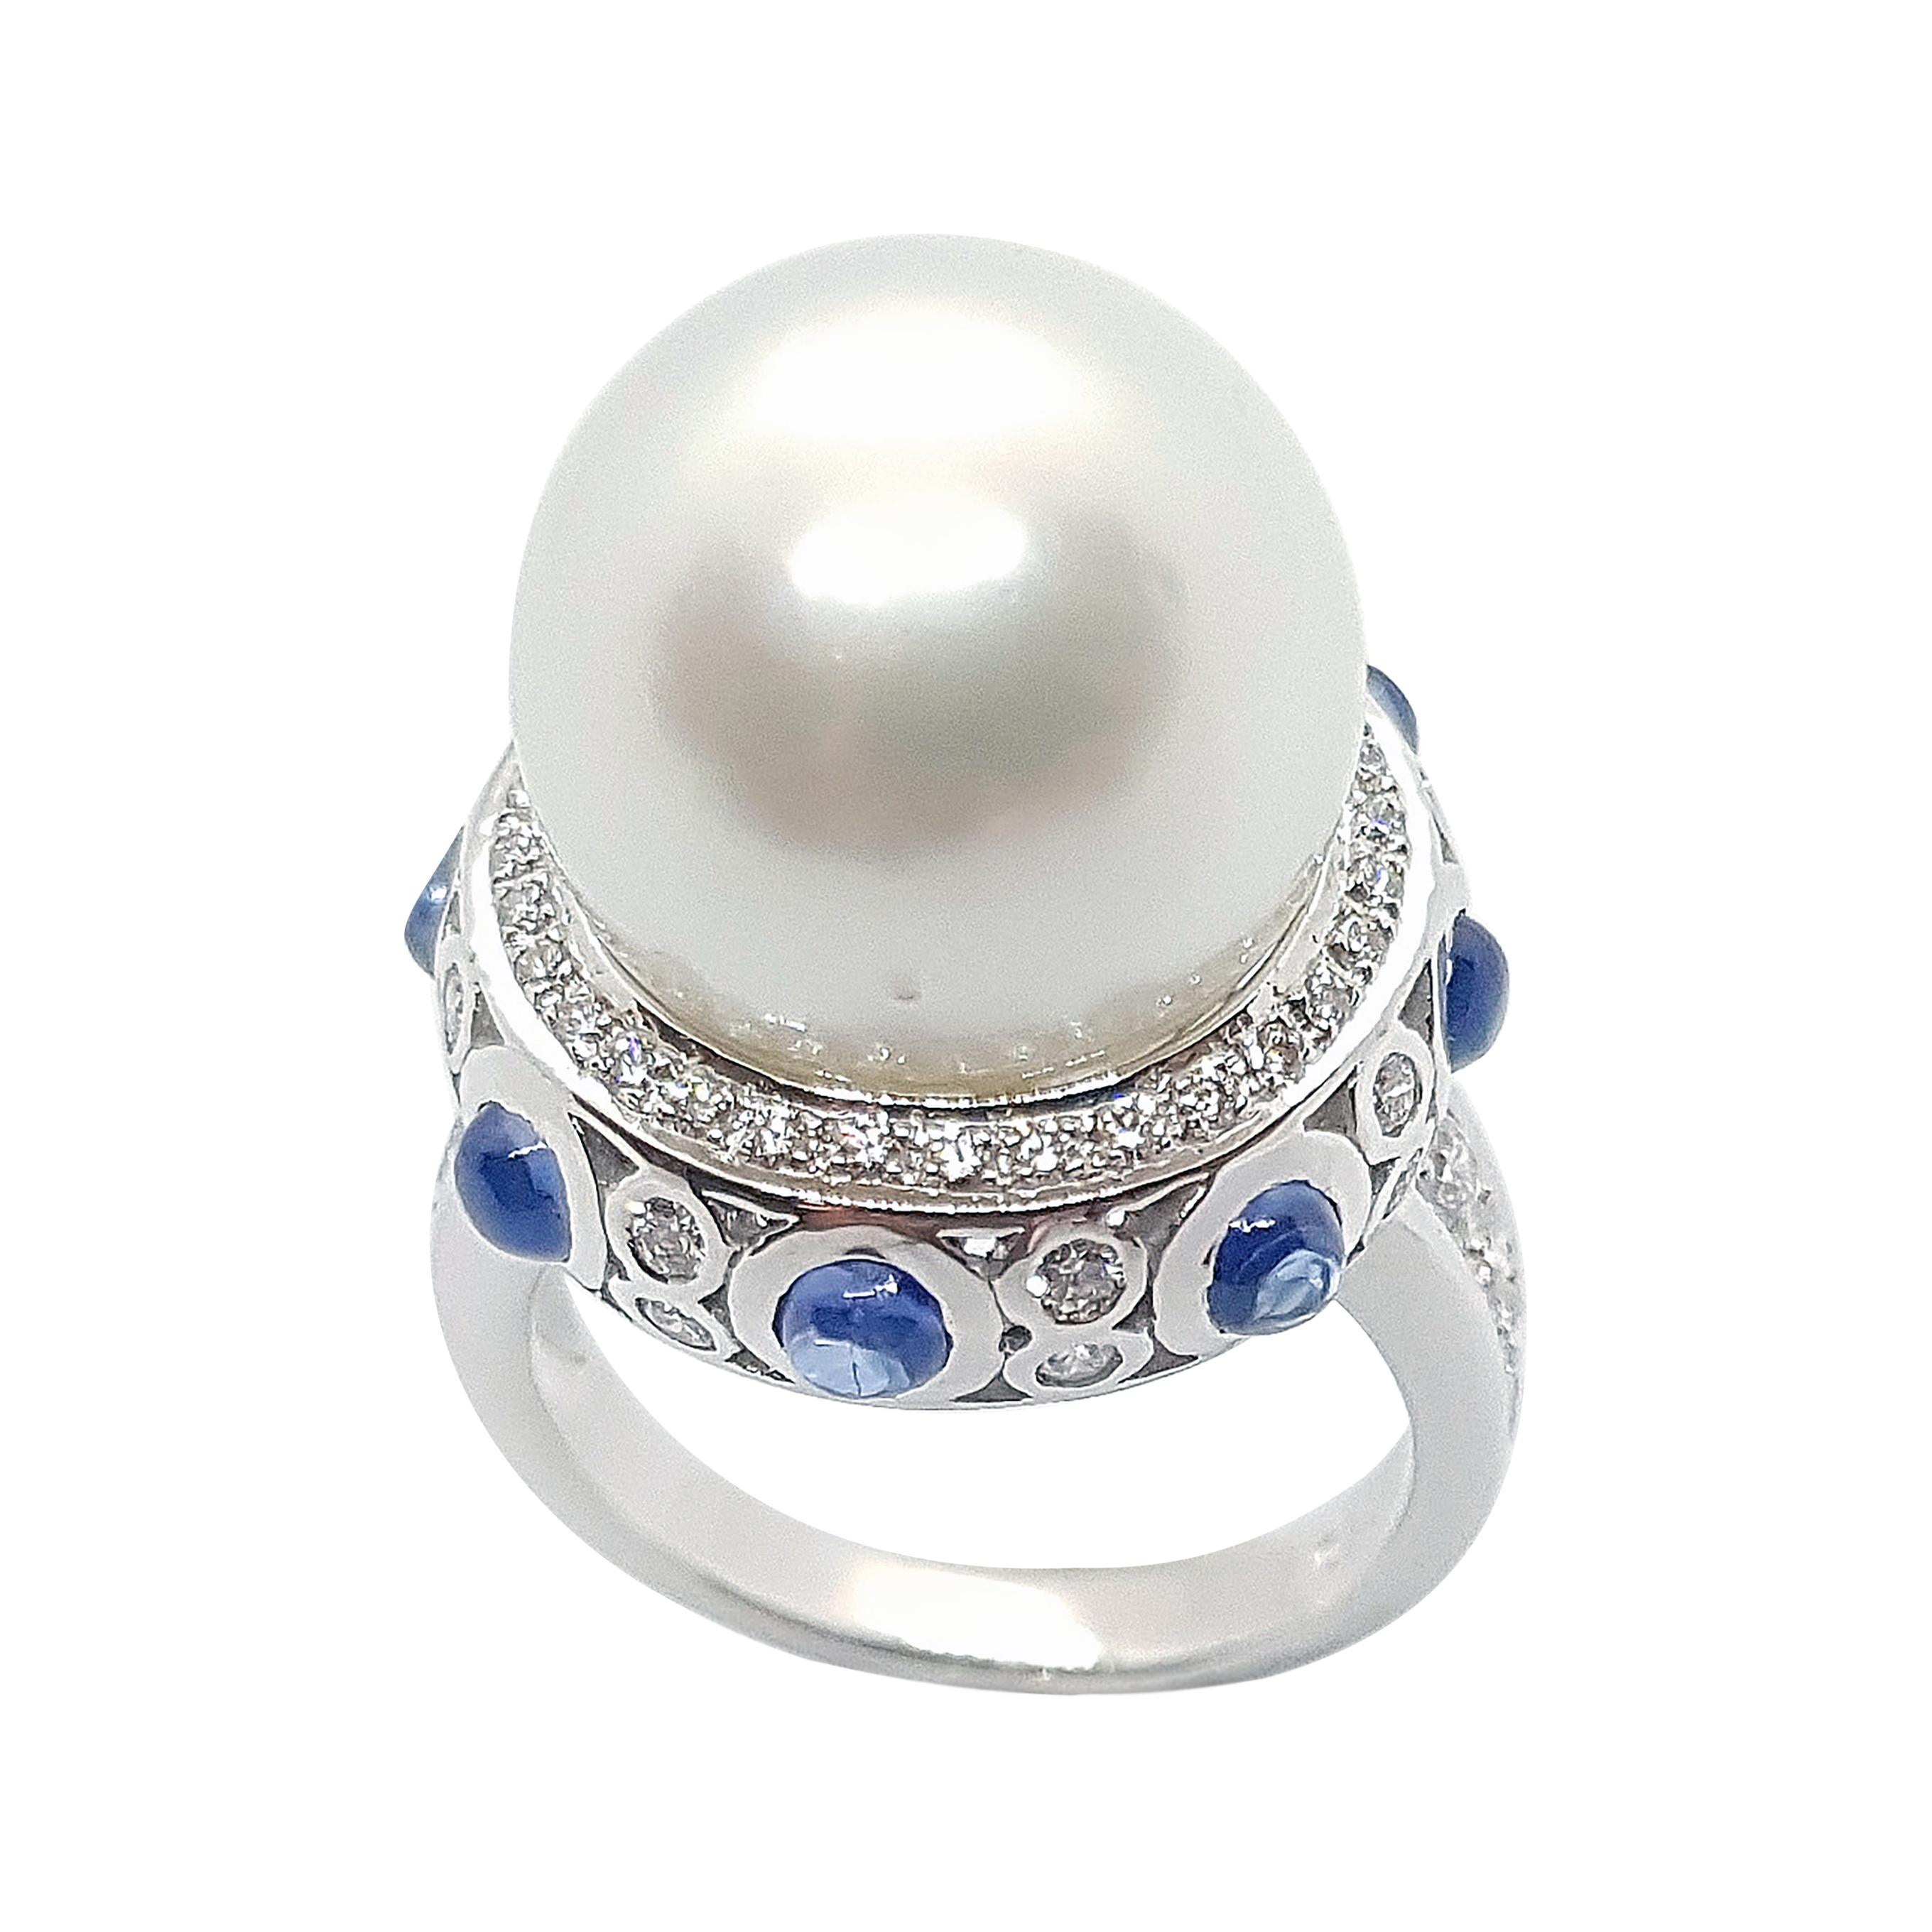 South Sea Pearl with Cabochon Blue Sapphire and Diamond Ring 18 Karat White Gold